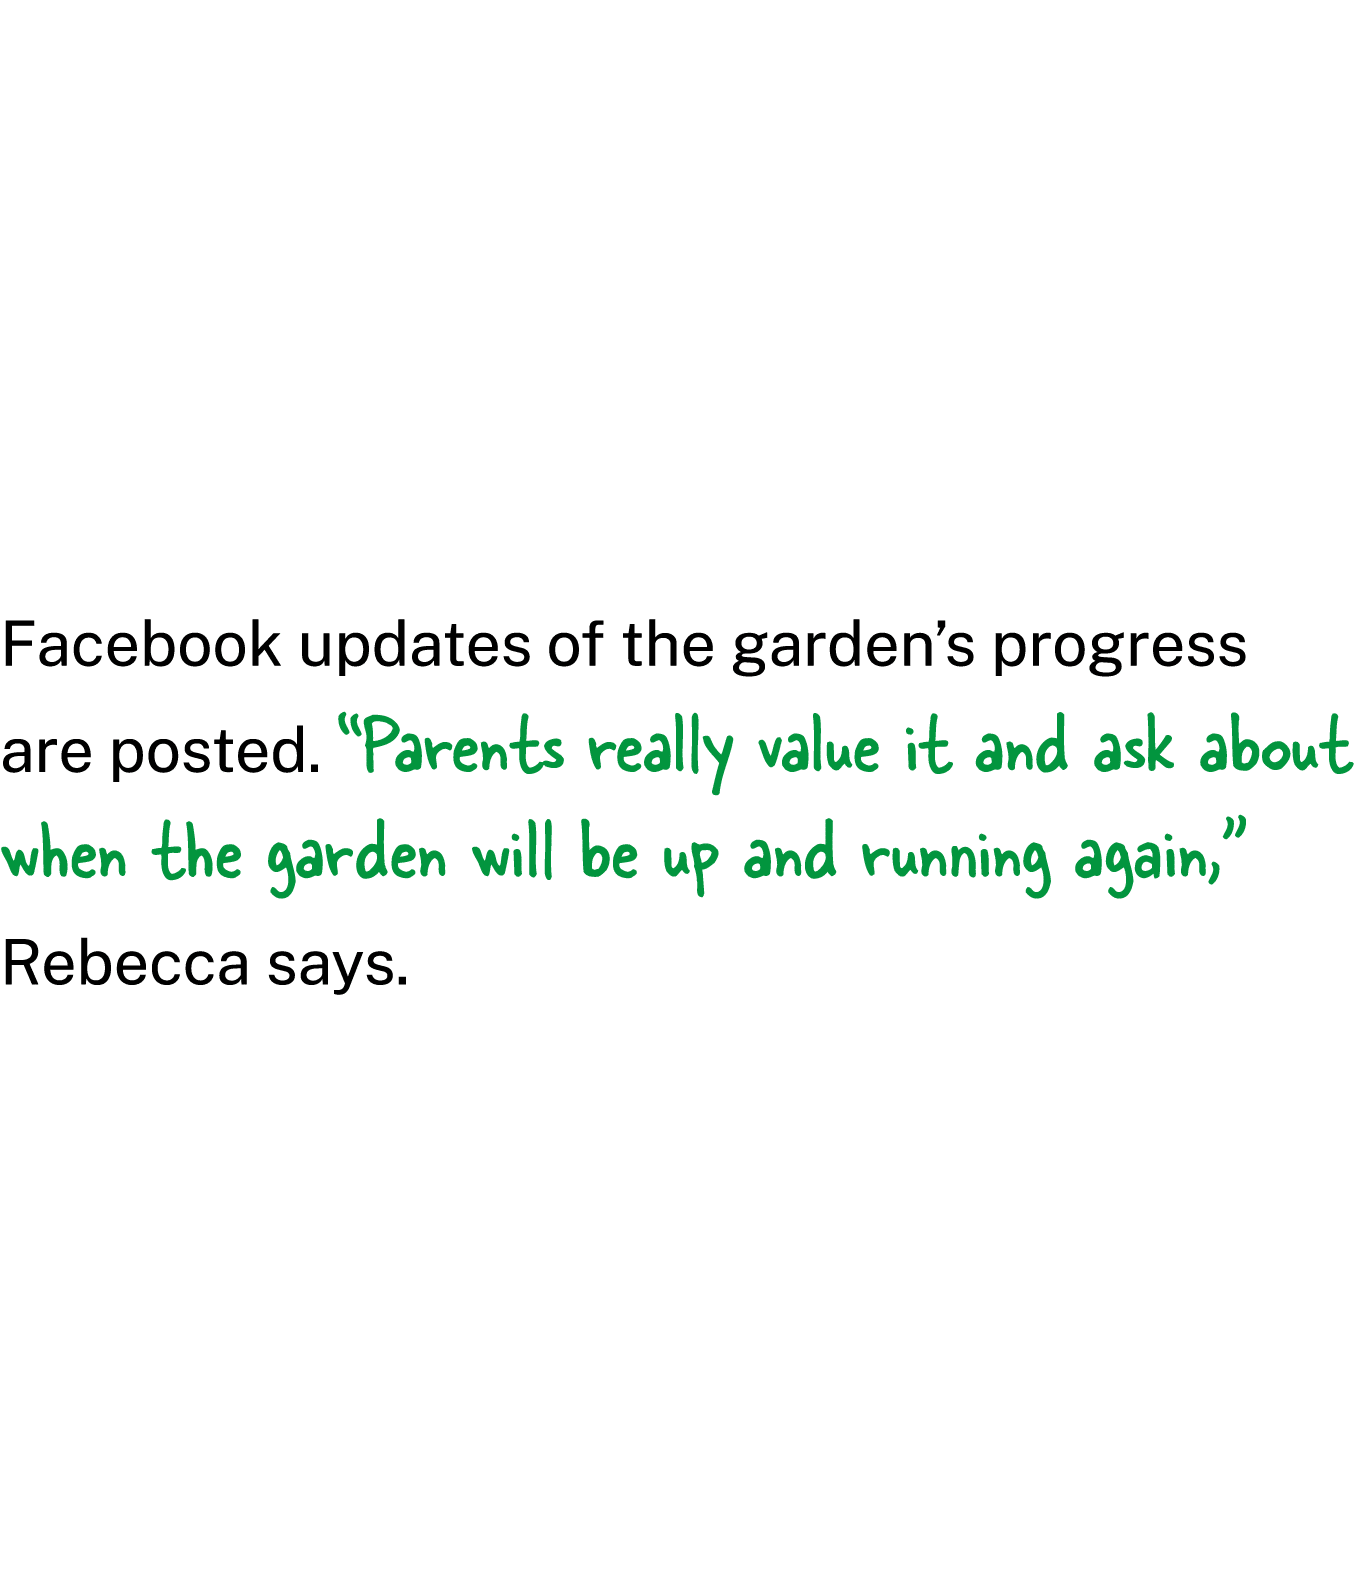 Facebook updates of the garden’s progress are posted. “Parents really value it and ask about when the garden will be ...